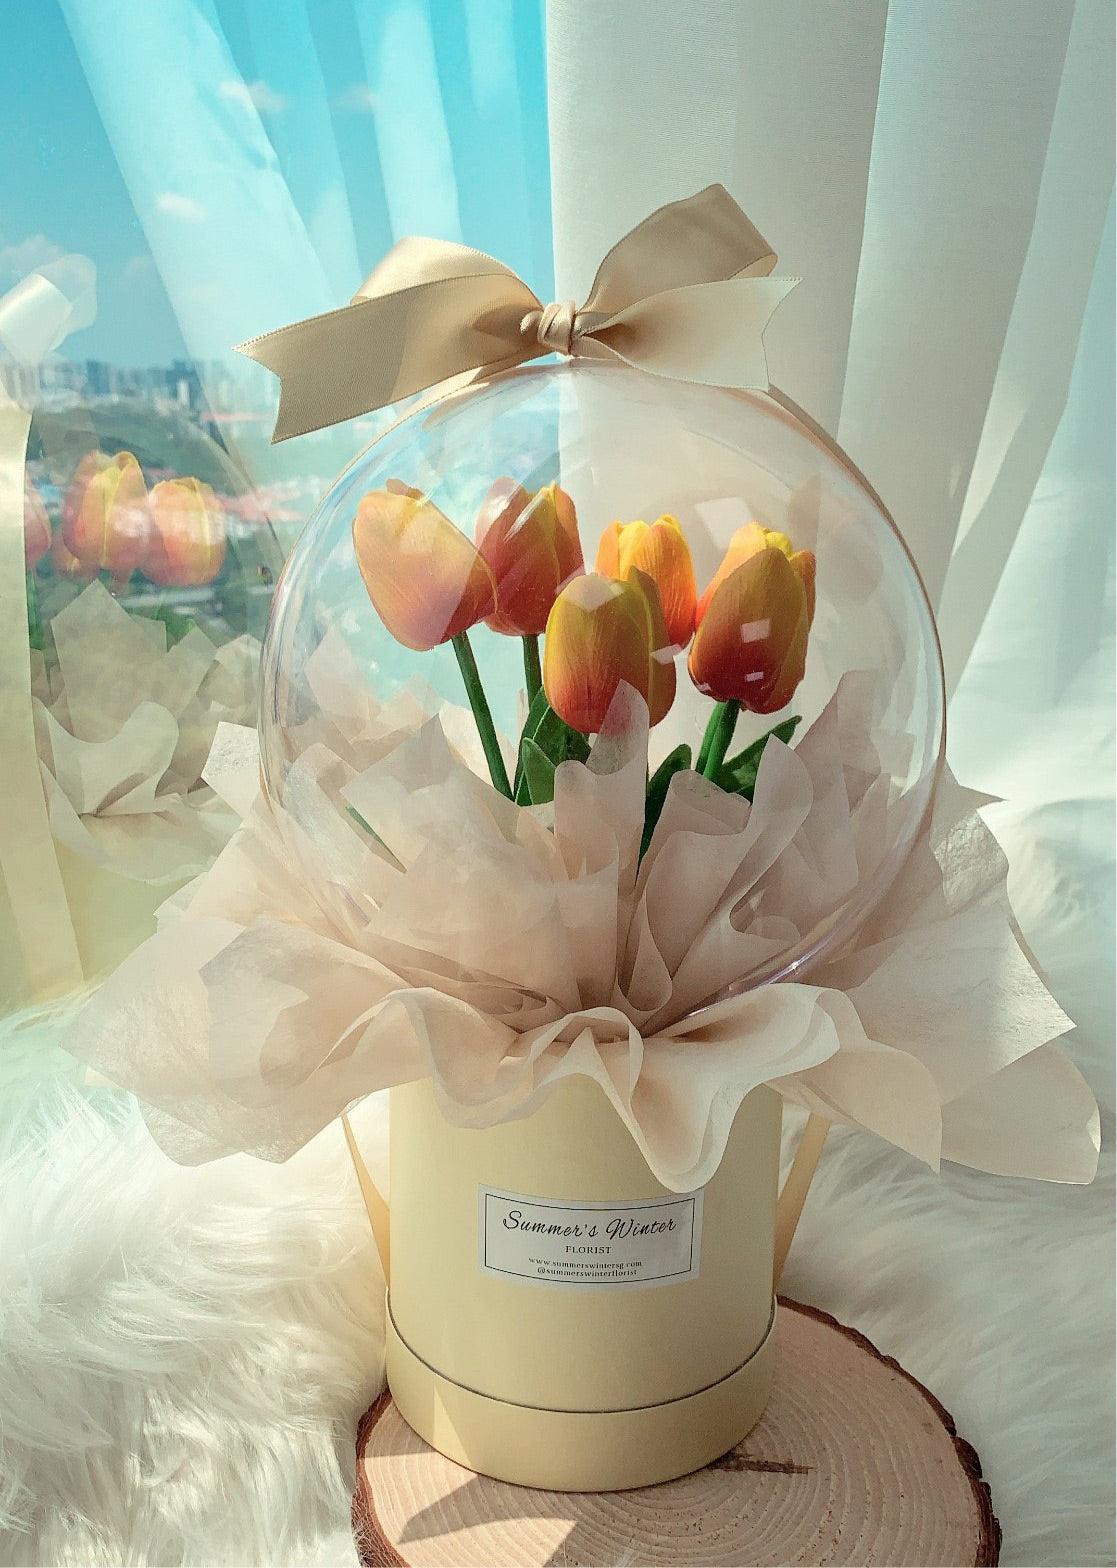 Crystal Ball Bouquet Tulip Flowers 